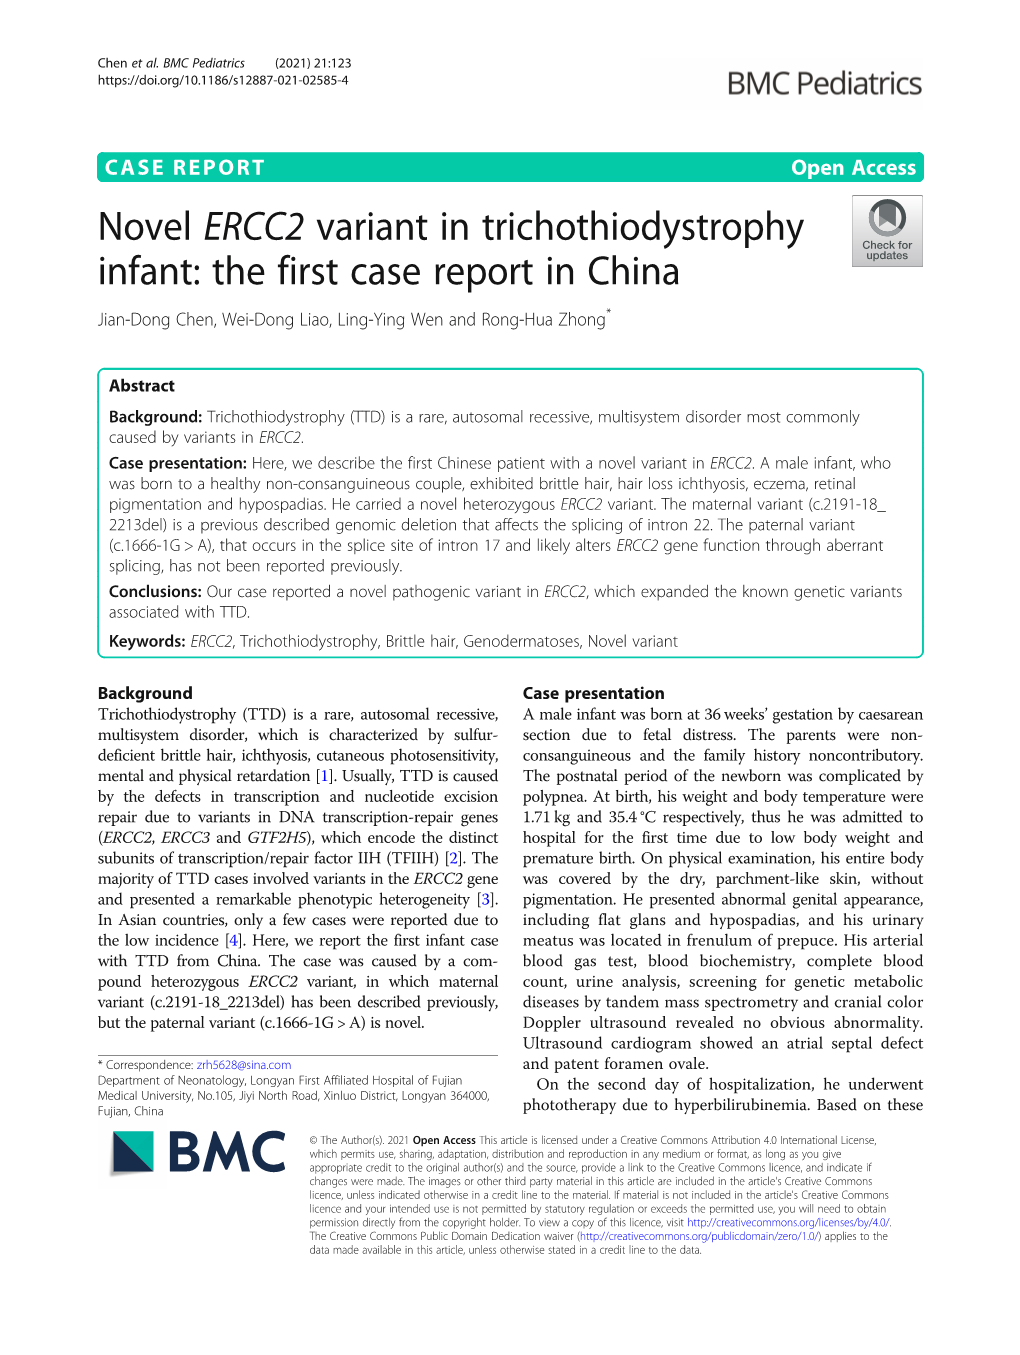 Novel ERCC2 Variant in Trichothiodystrophy Infant: the First Case Report in China Jian-Dong Chen, Wei-Dong Liao, Ling-Ying Wen and Rong-Hua Zhong*